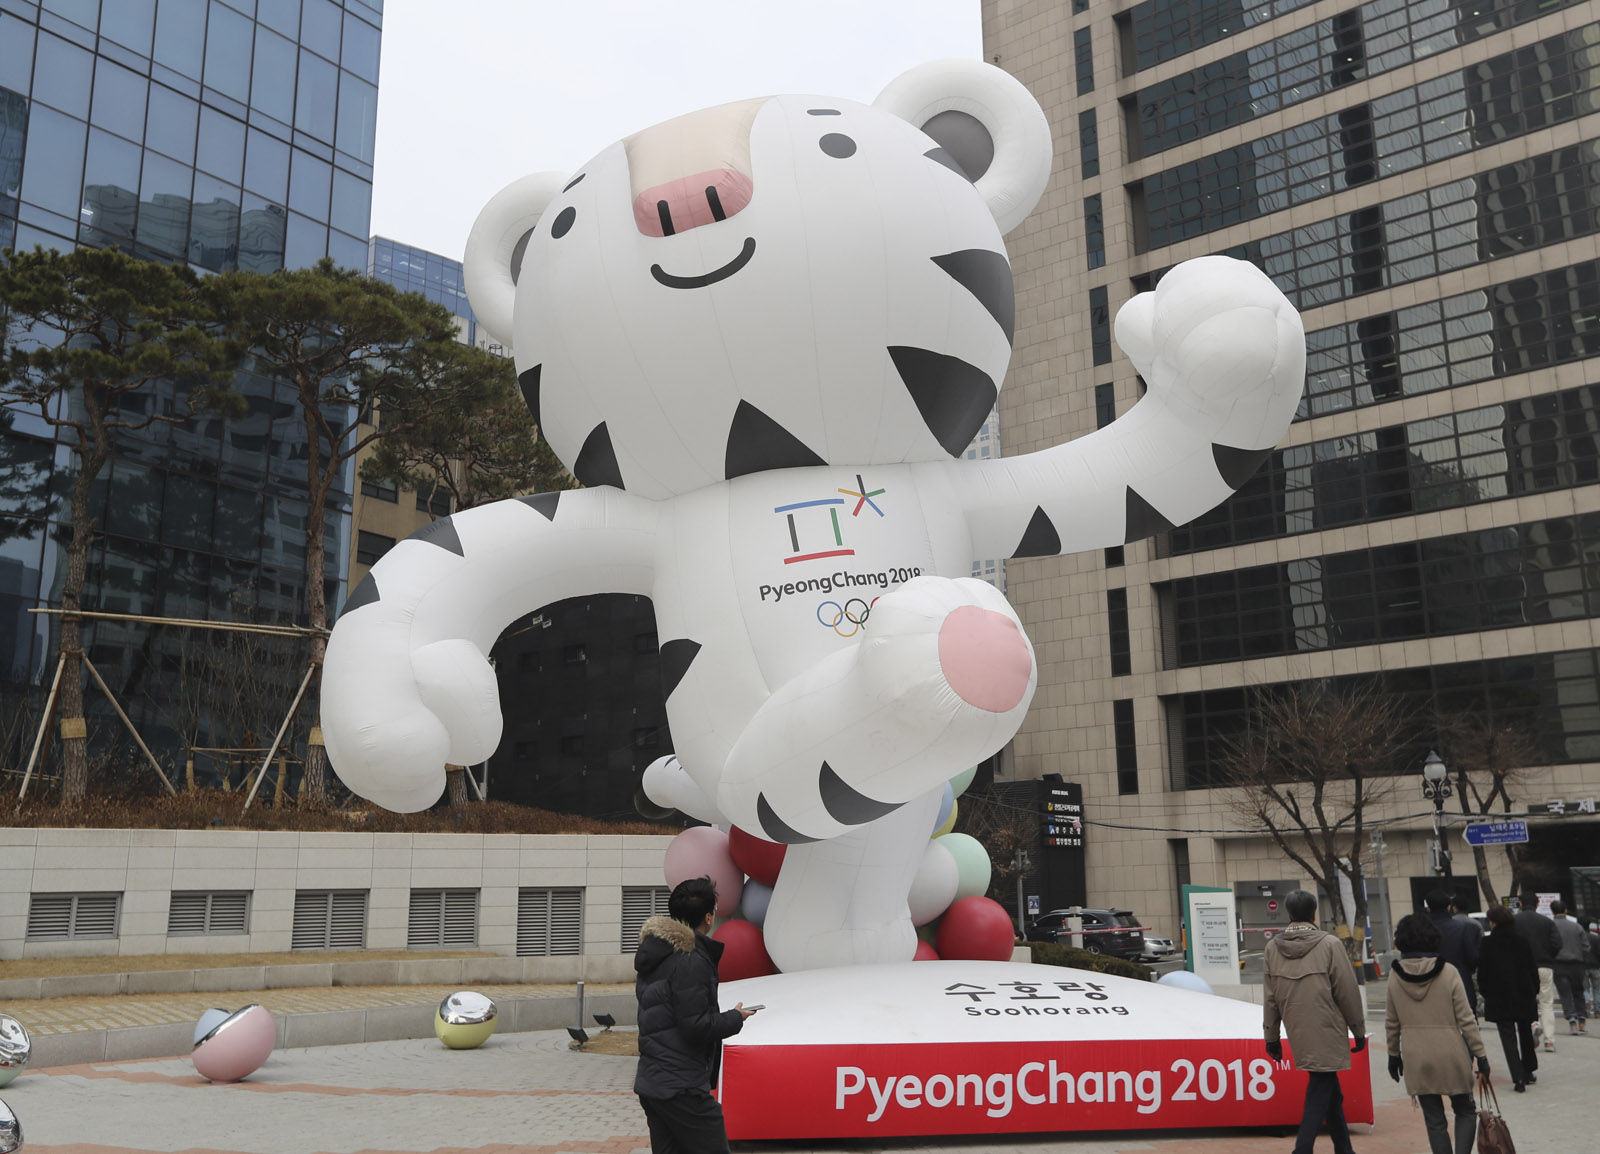 People walk by an official mascot of the 2018 Pyeongchang Olympic Winter Games, white tiger "Soohorang" in downtown Seoul, South Korea, Friday, Dec. 29, 2017. South Korea's Pyeongchang is the host city of the 2018 Olympic and Paralympic Winter Games which will be held from February 2018. (AP Photo/Lee Jin-man)